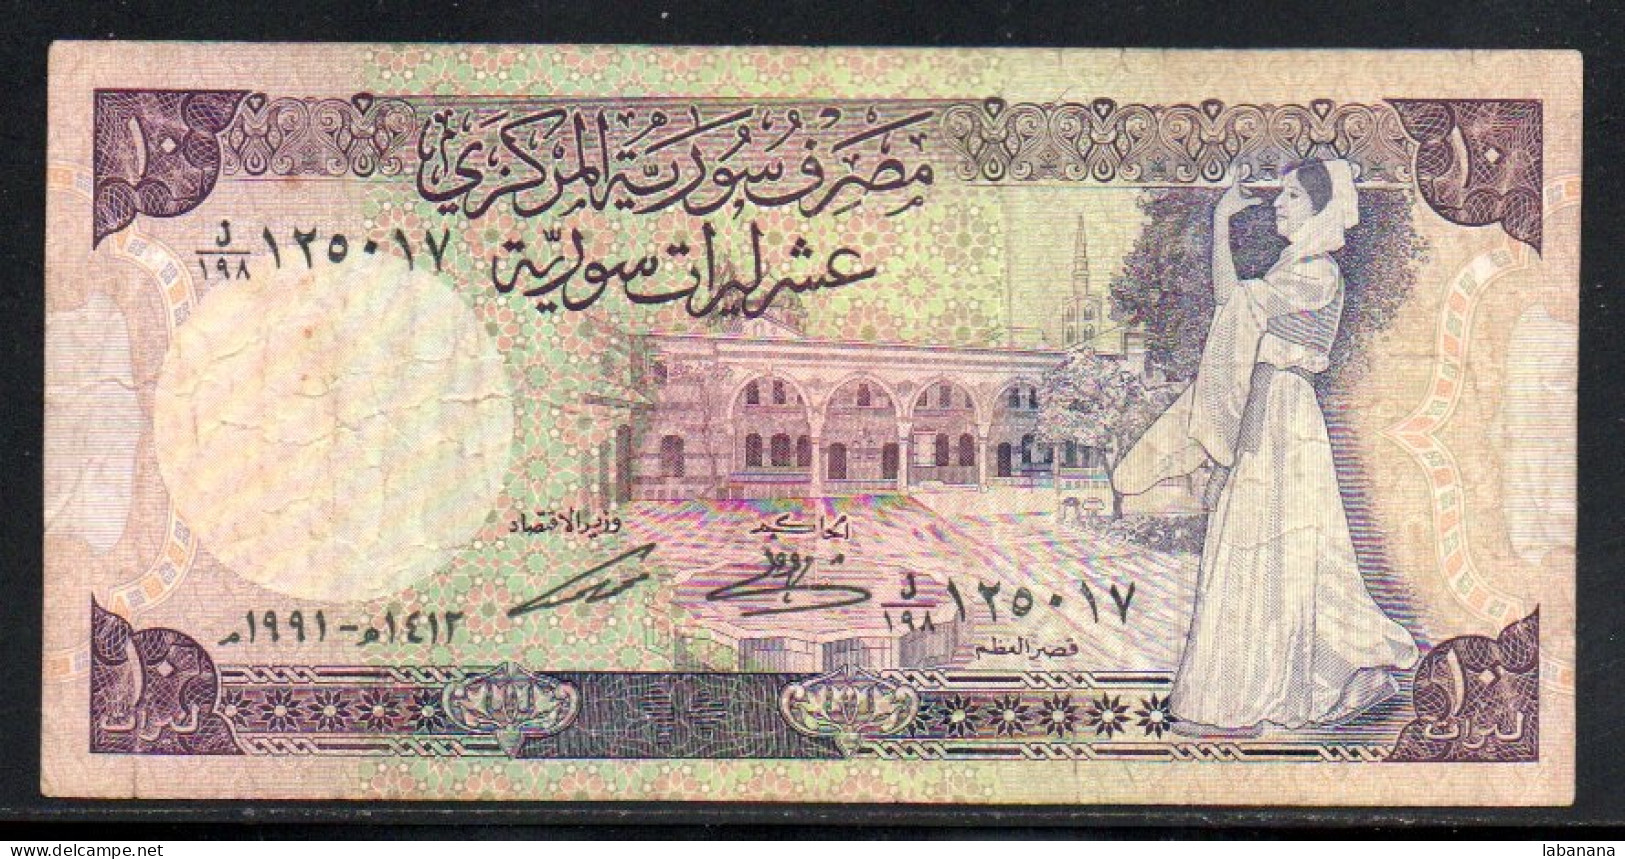 659-Syrie 10 Pounds 1991 - Syrien